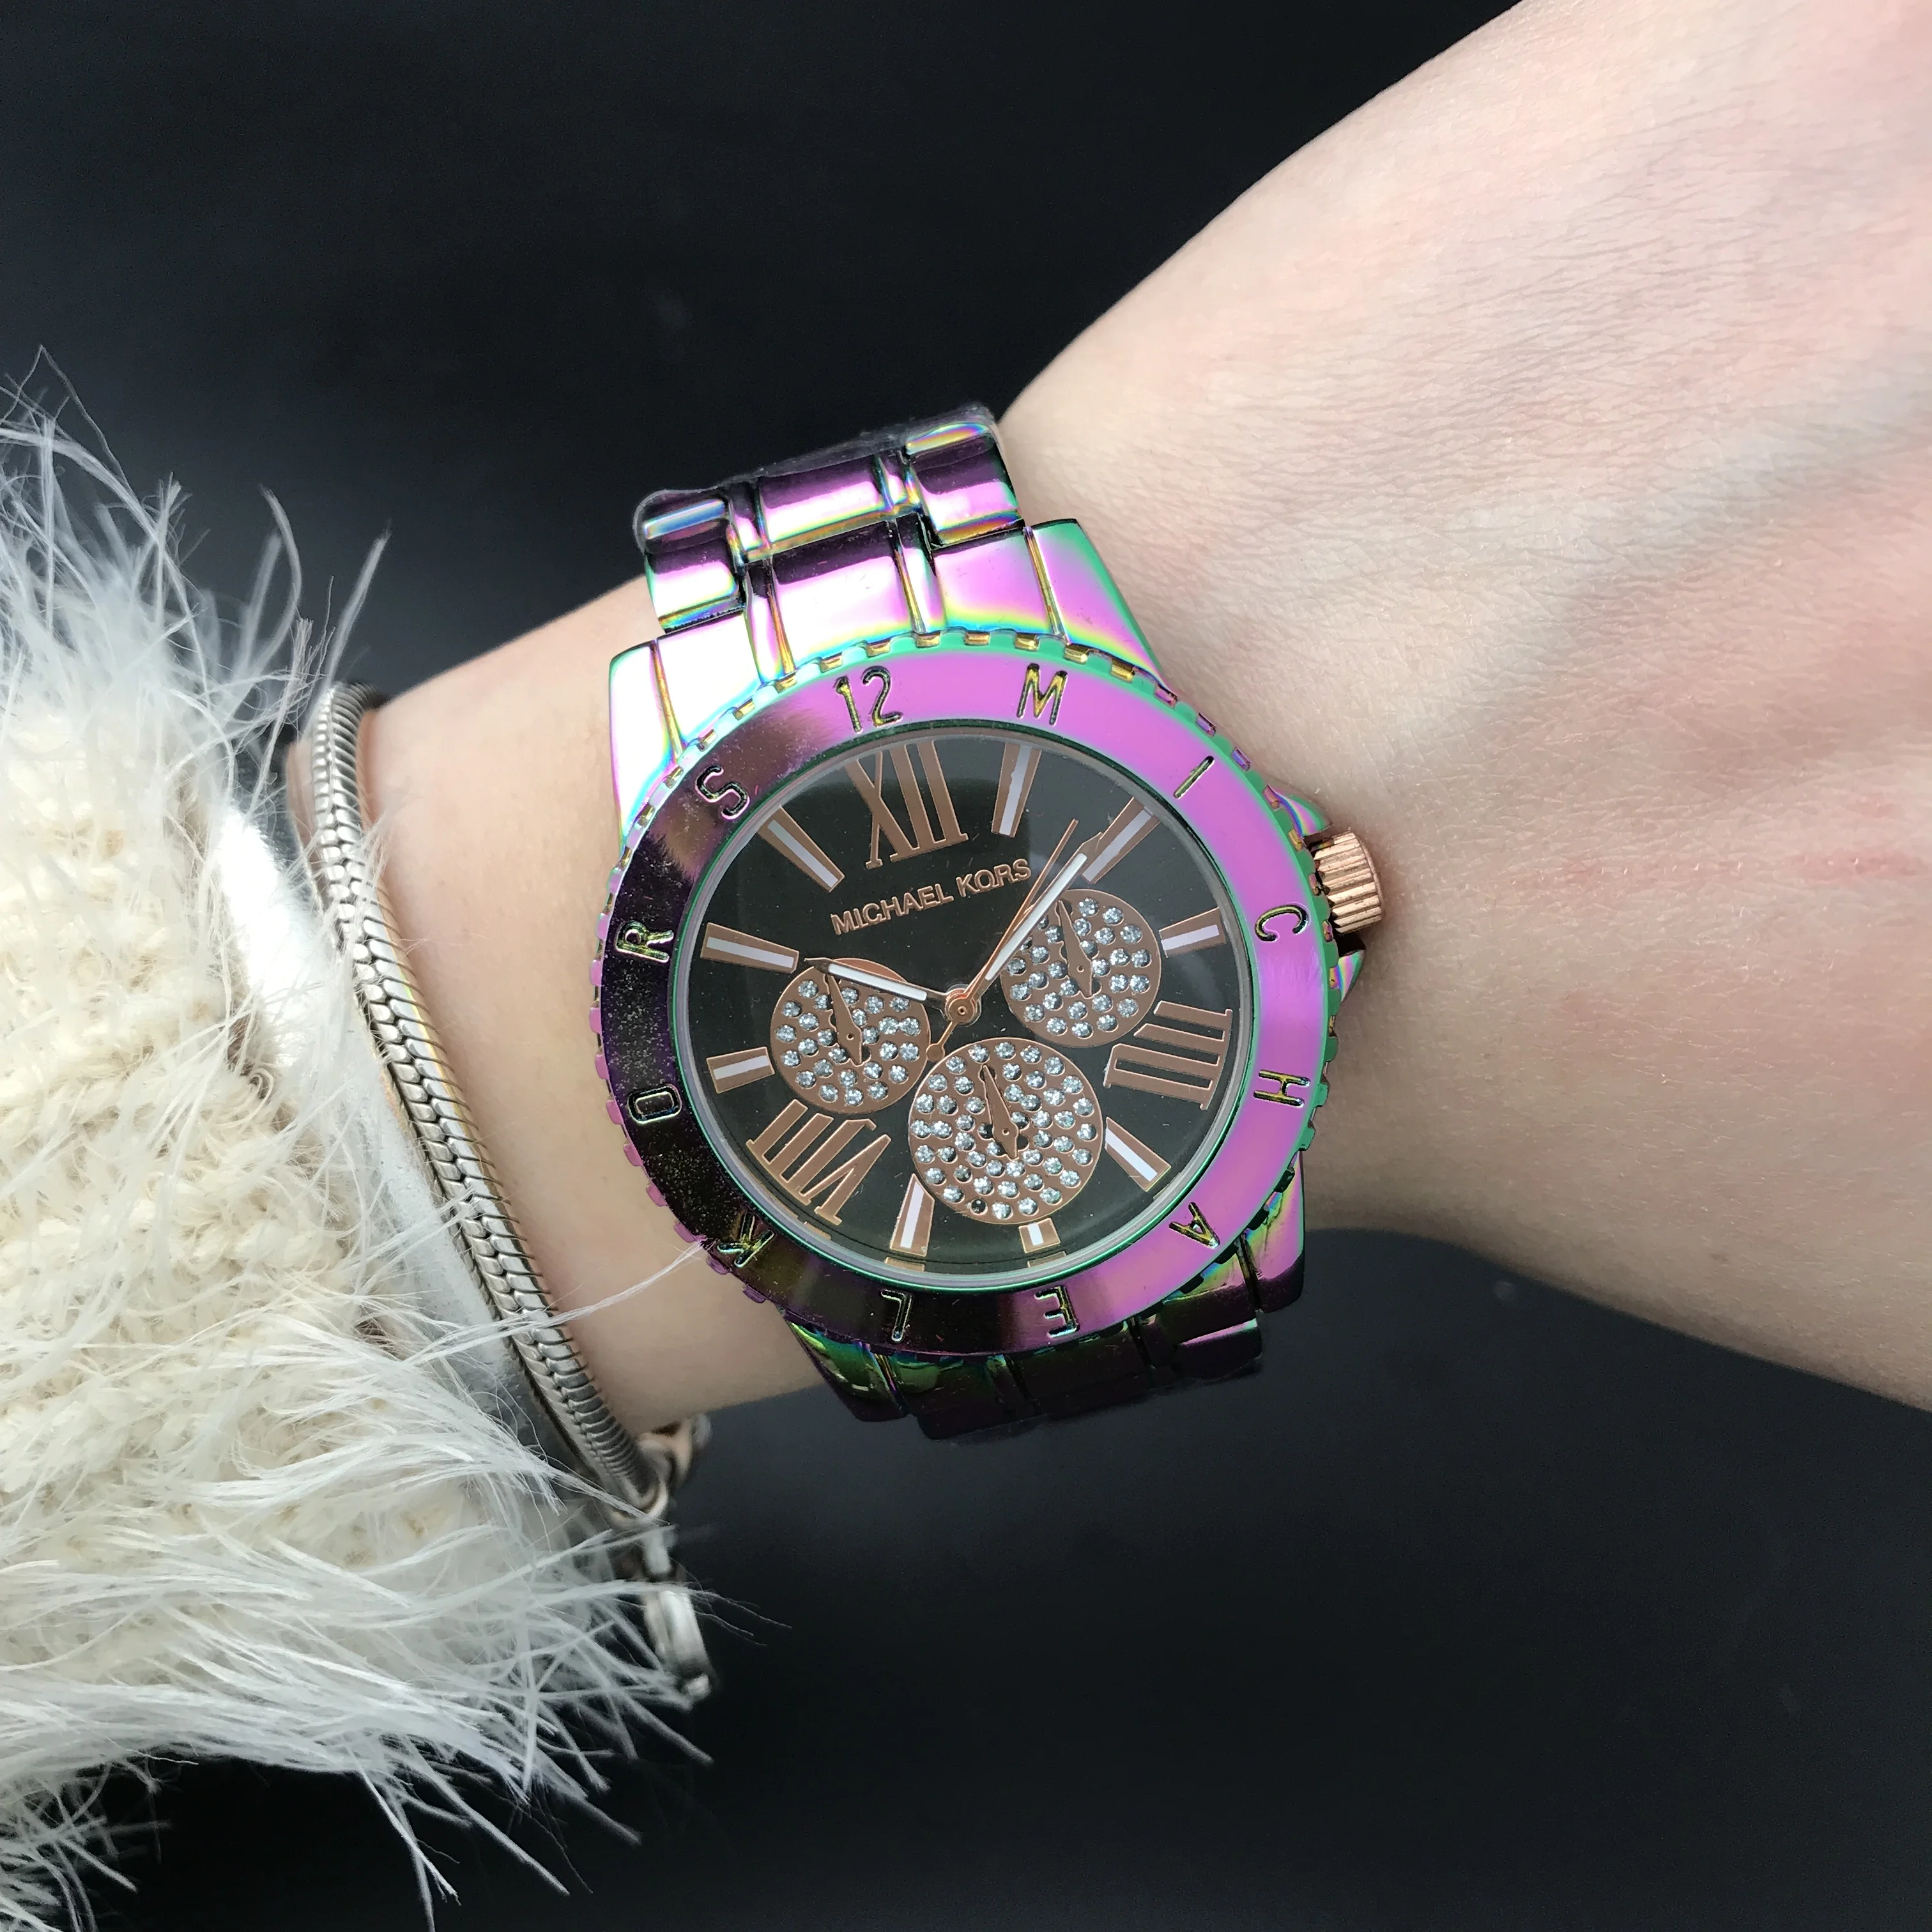 

Hot Sale MK Watch Gradient Color High-end Business Quartz Watch with Gift Box Free Shipping, 5 colors